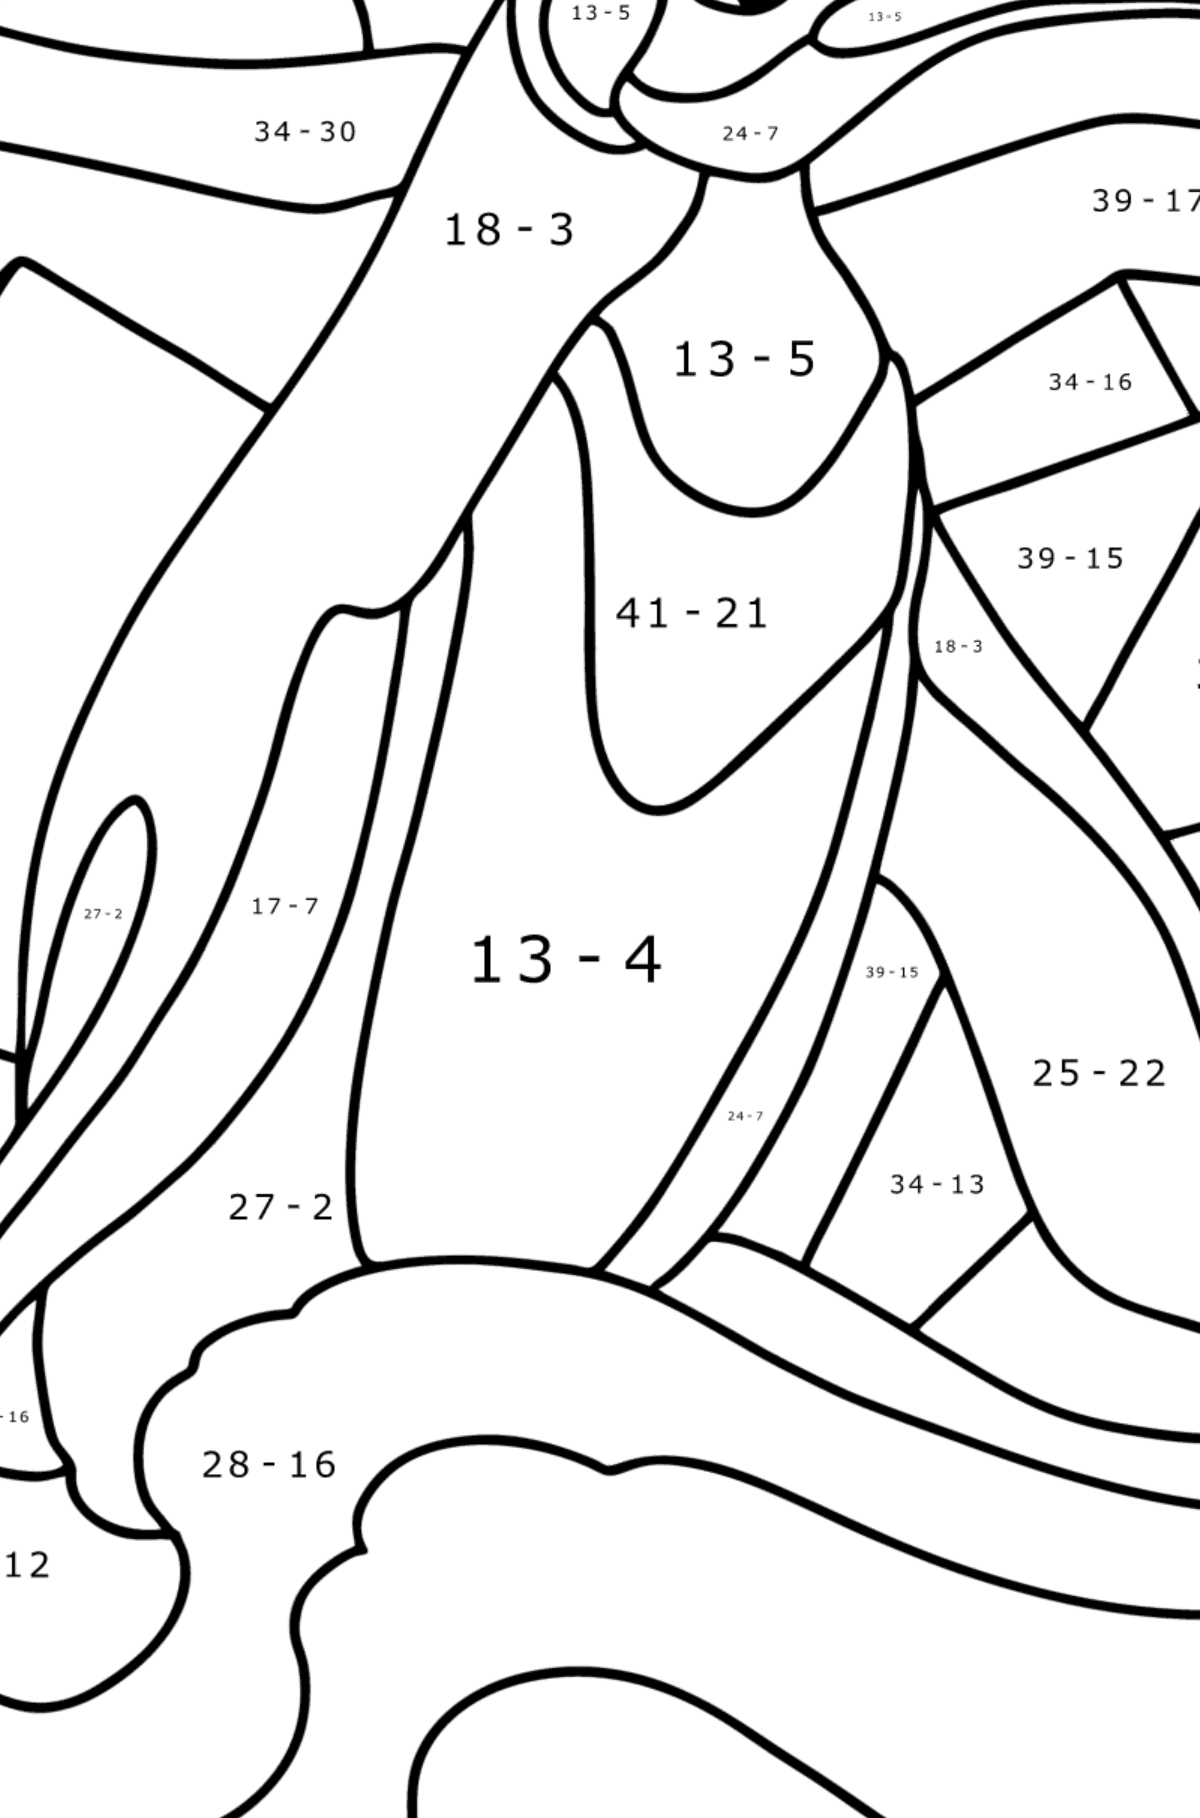 King penguin coloring page - Math Coloring - Subtraction for Kids